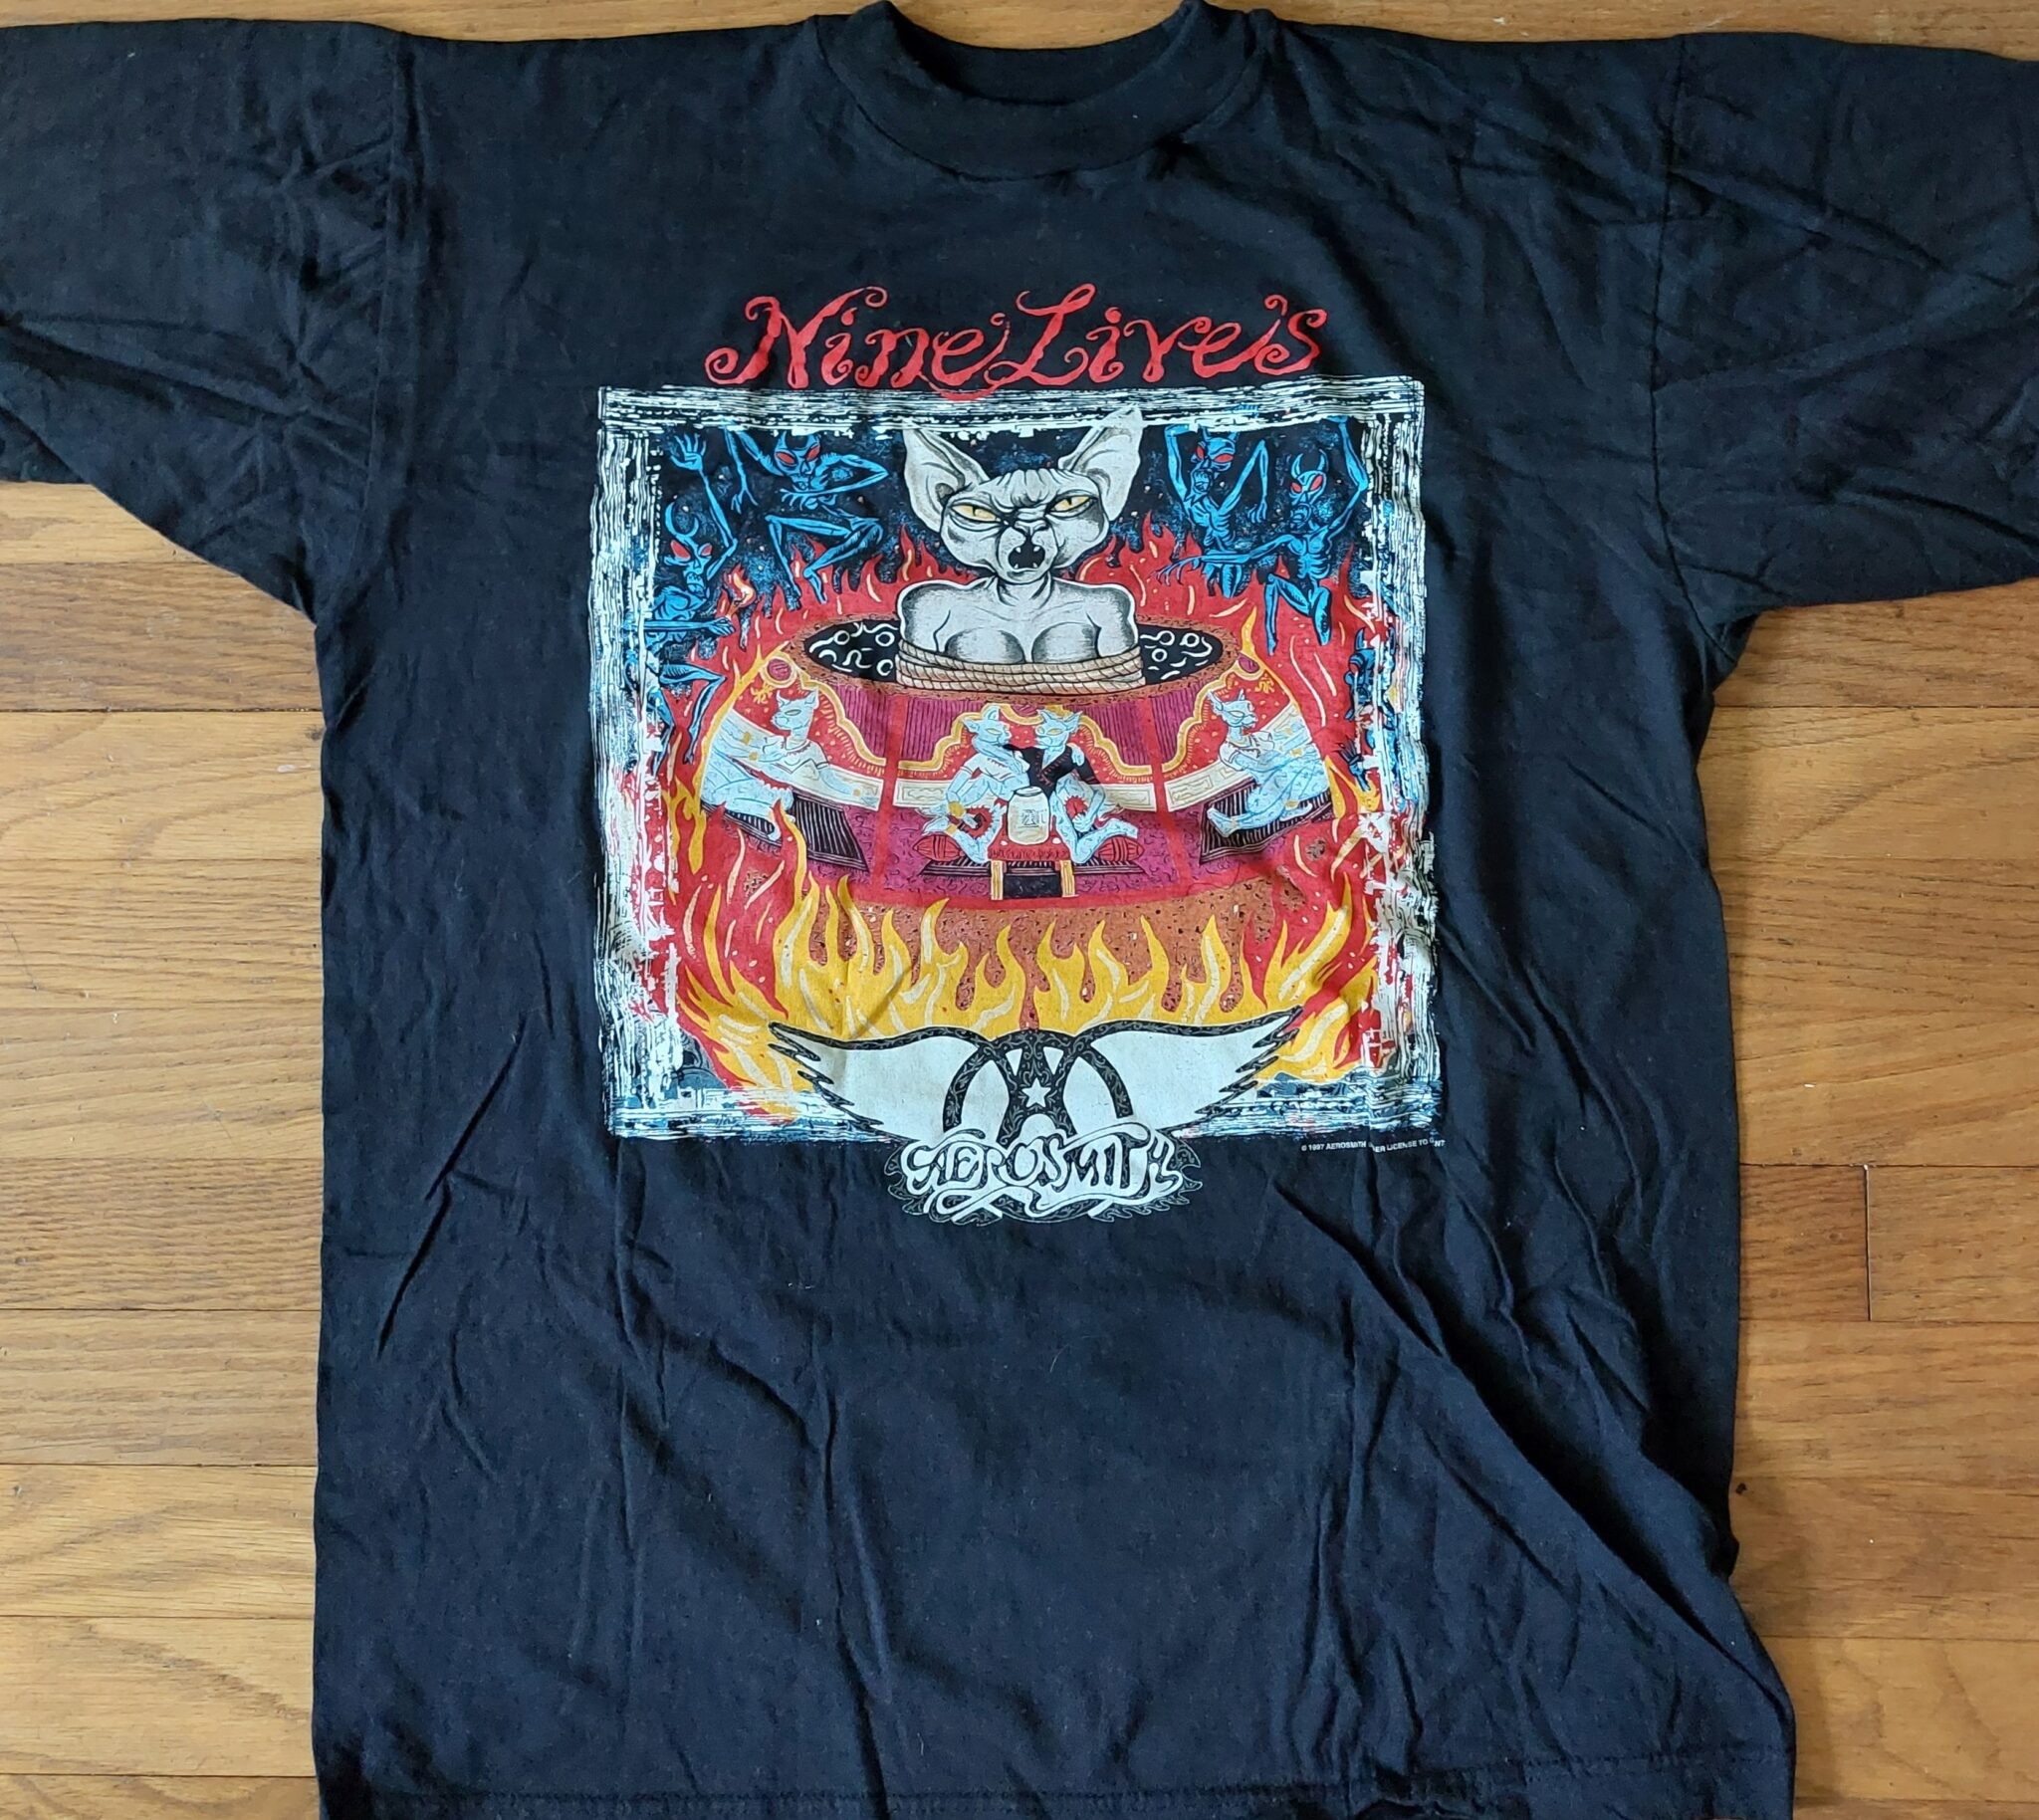 Nine Lives – 1997 European Tour Shirt. This is from the beginning